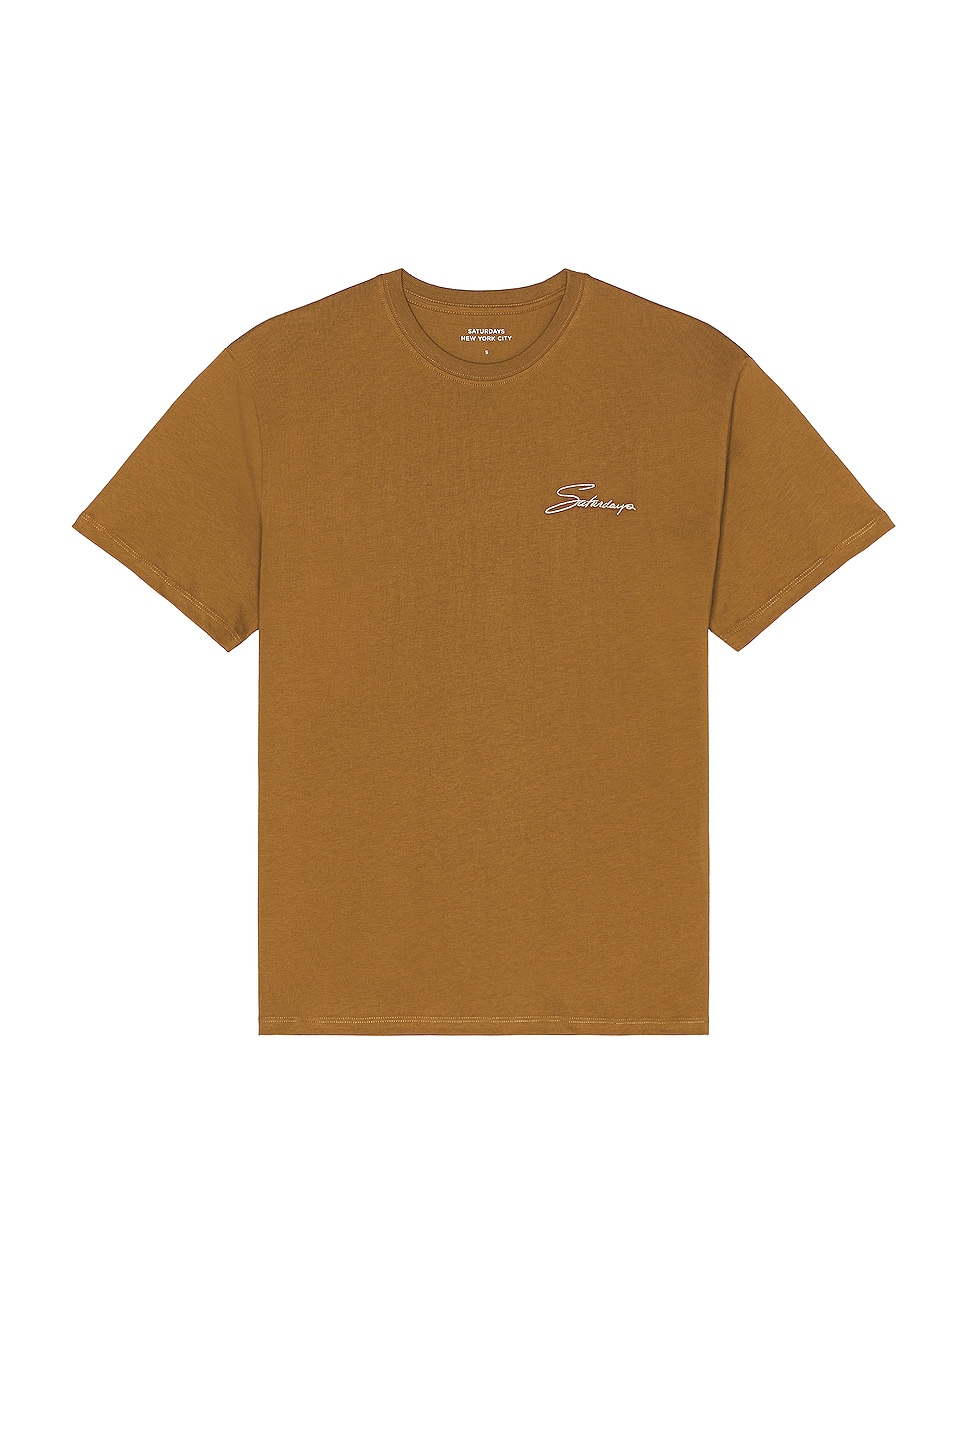 Image 1 of SATURDAYS NYC Signature Standard Tee in Camel